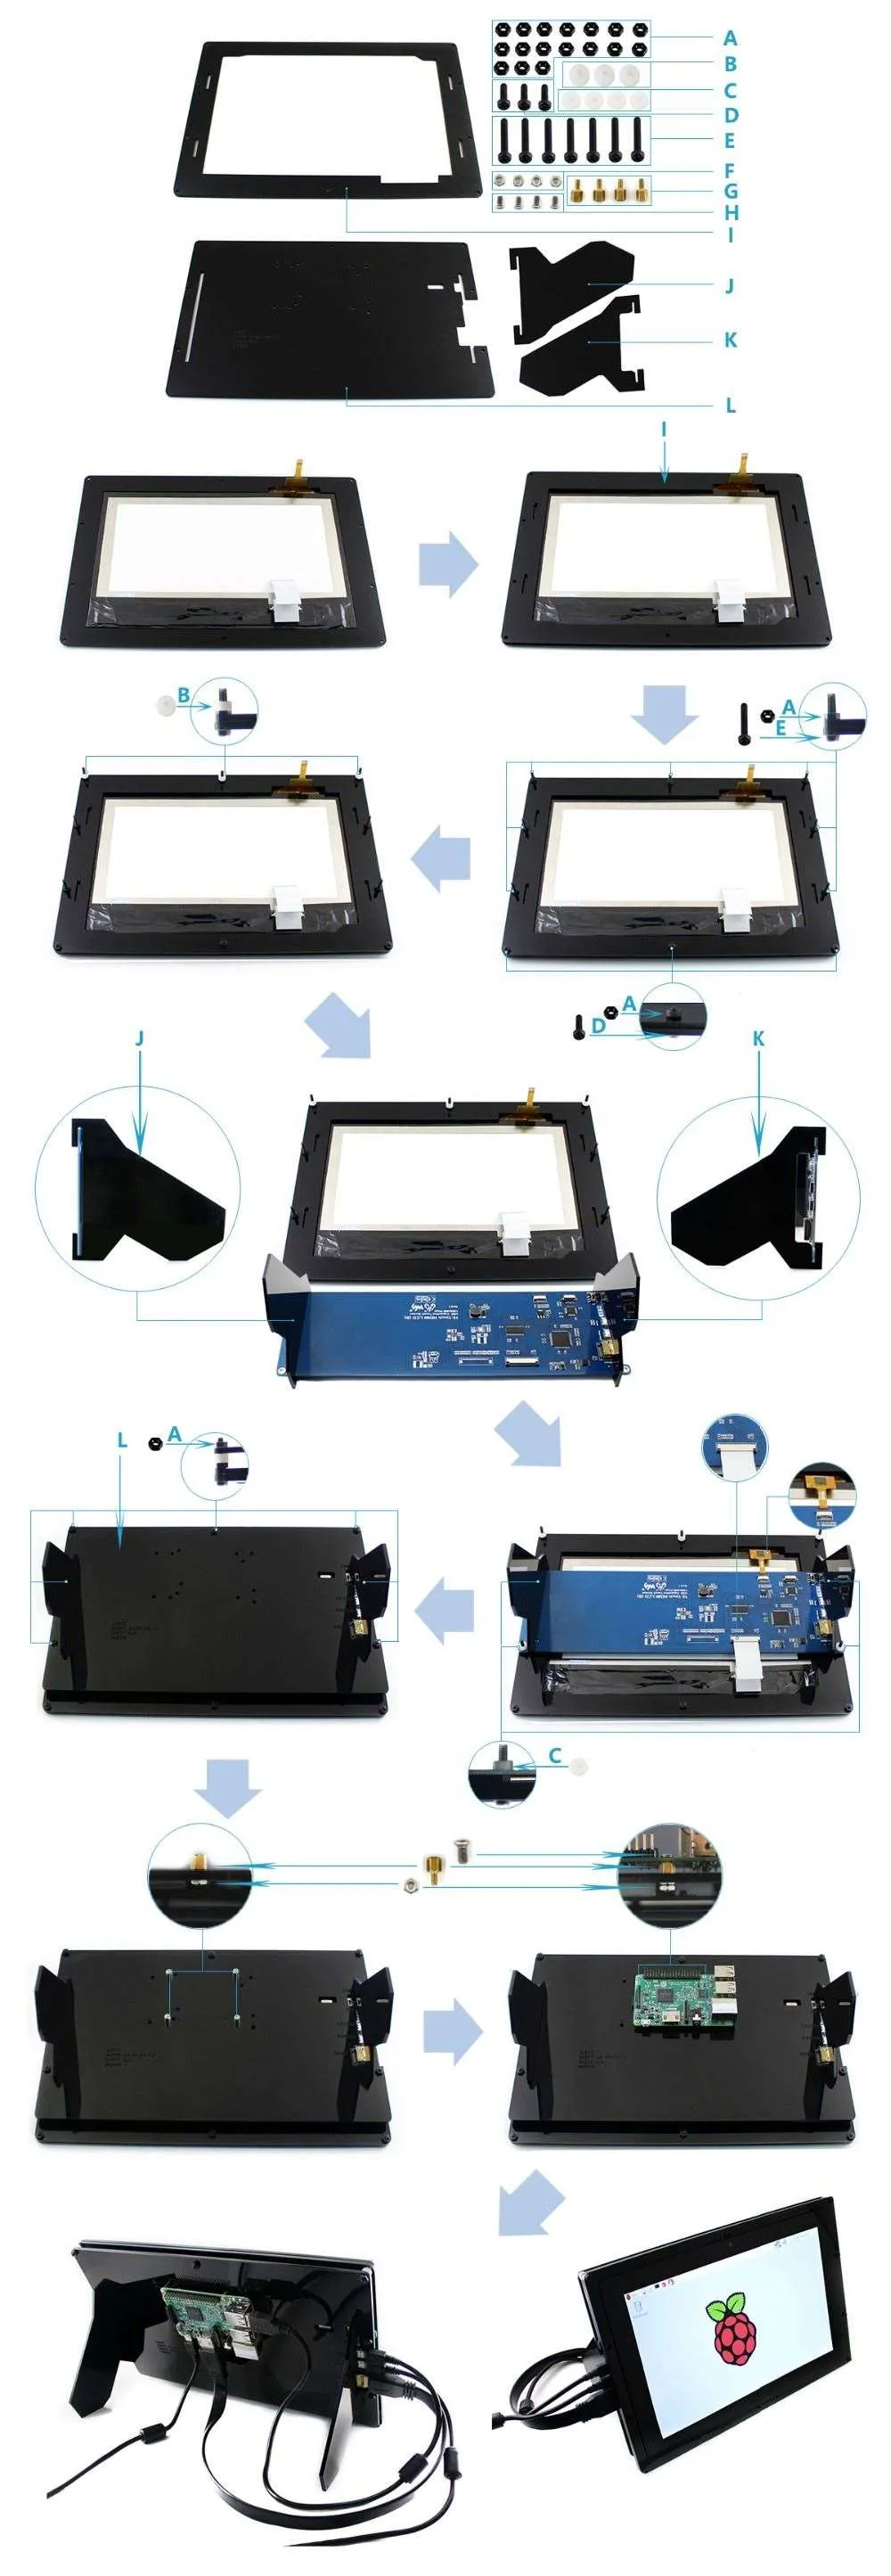 10.1inch-HDMI-LCD-B-with-Holder-assemble